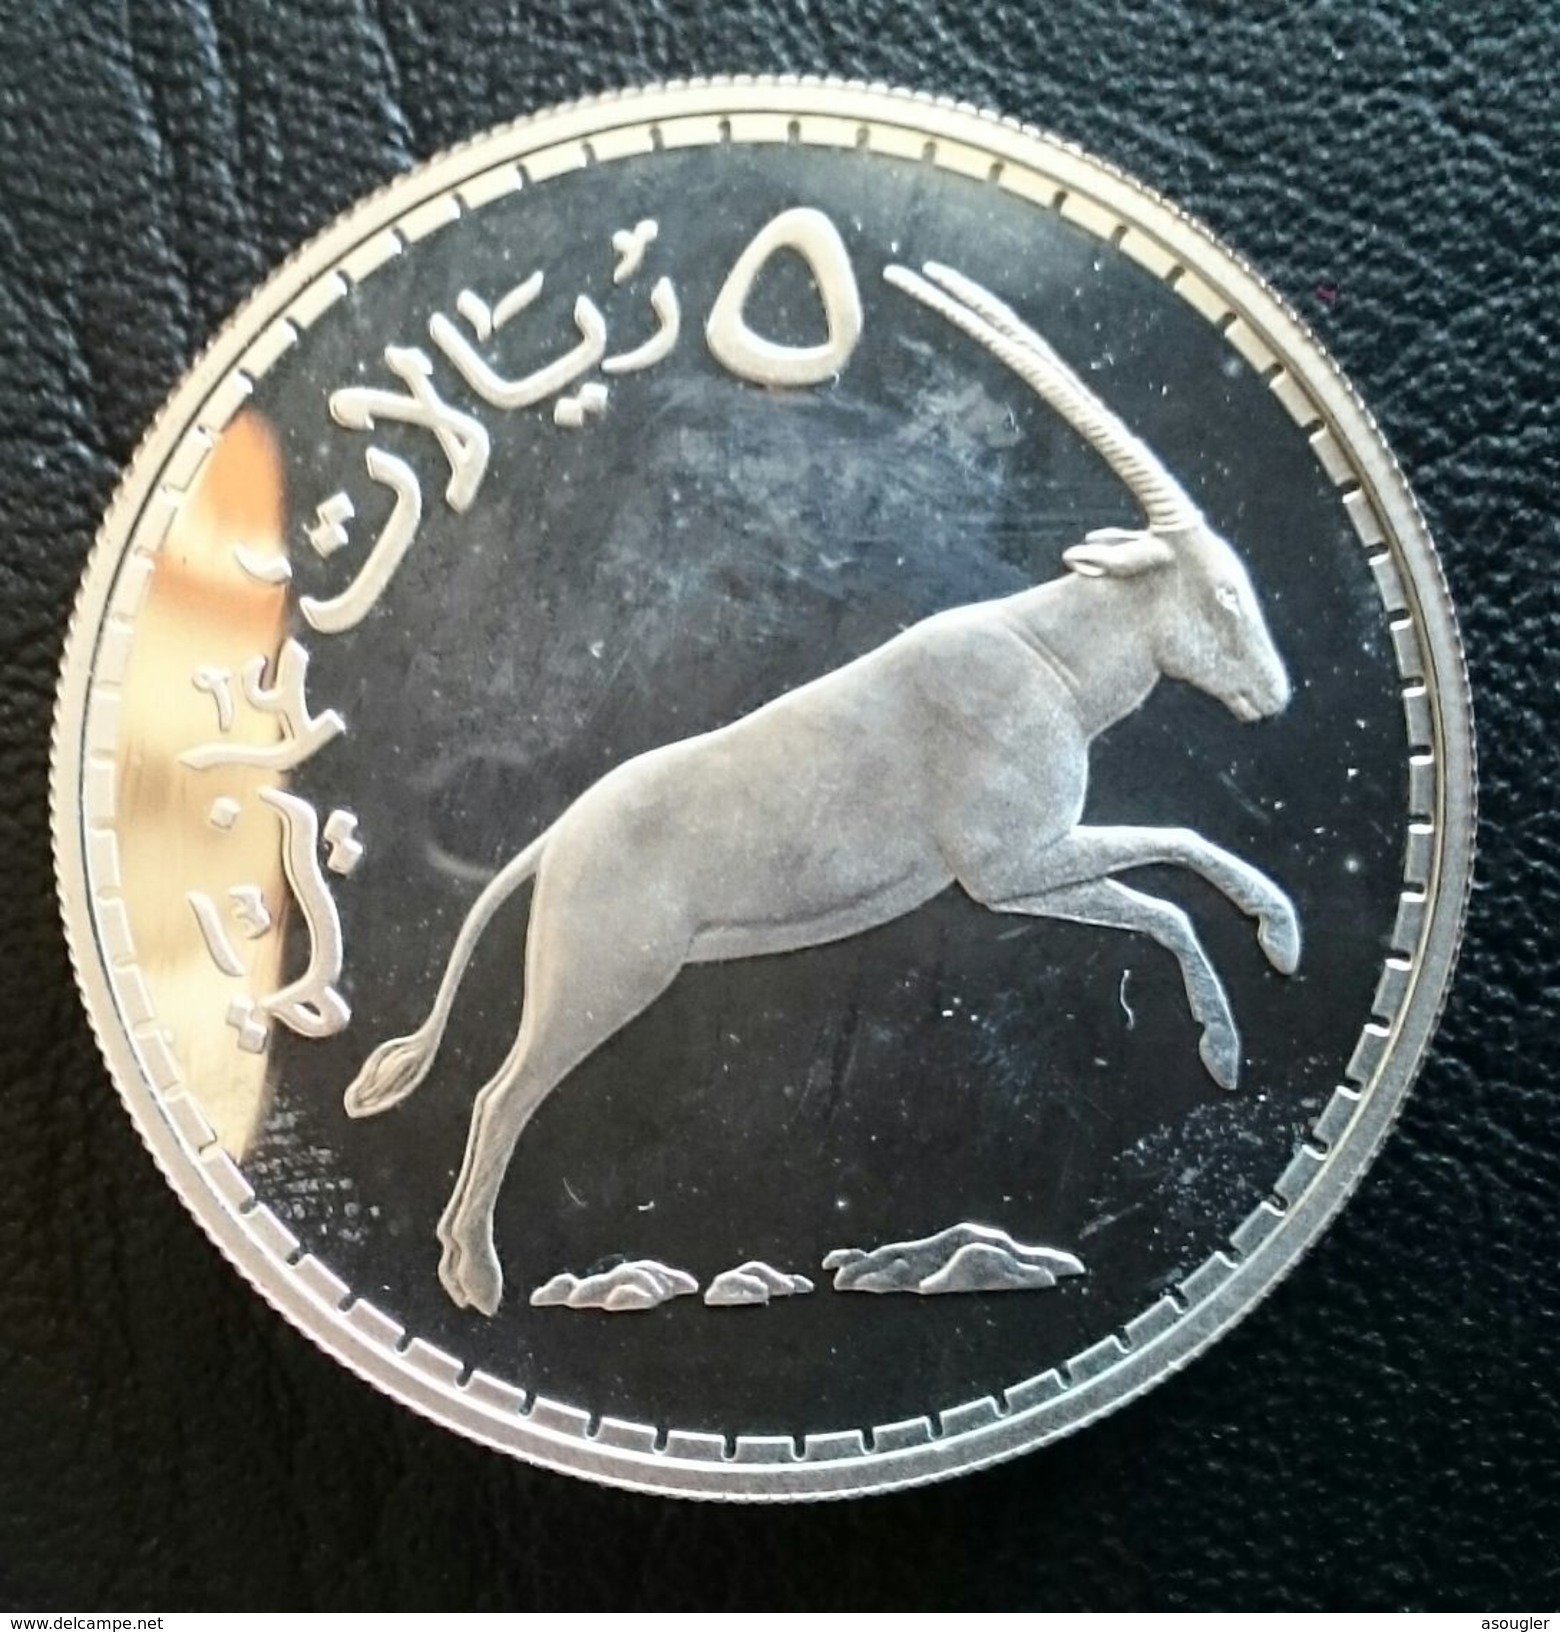 OMAN 5 RIALS 1976 SILVER PROOF "Conservation" Free Shipping Via Registered Air Mail - Oman